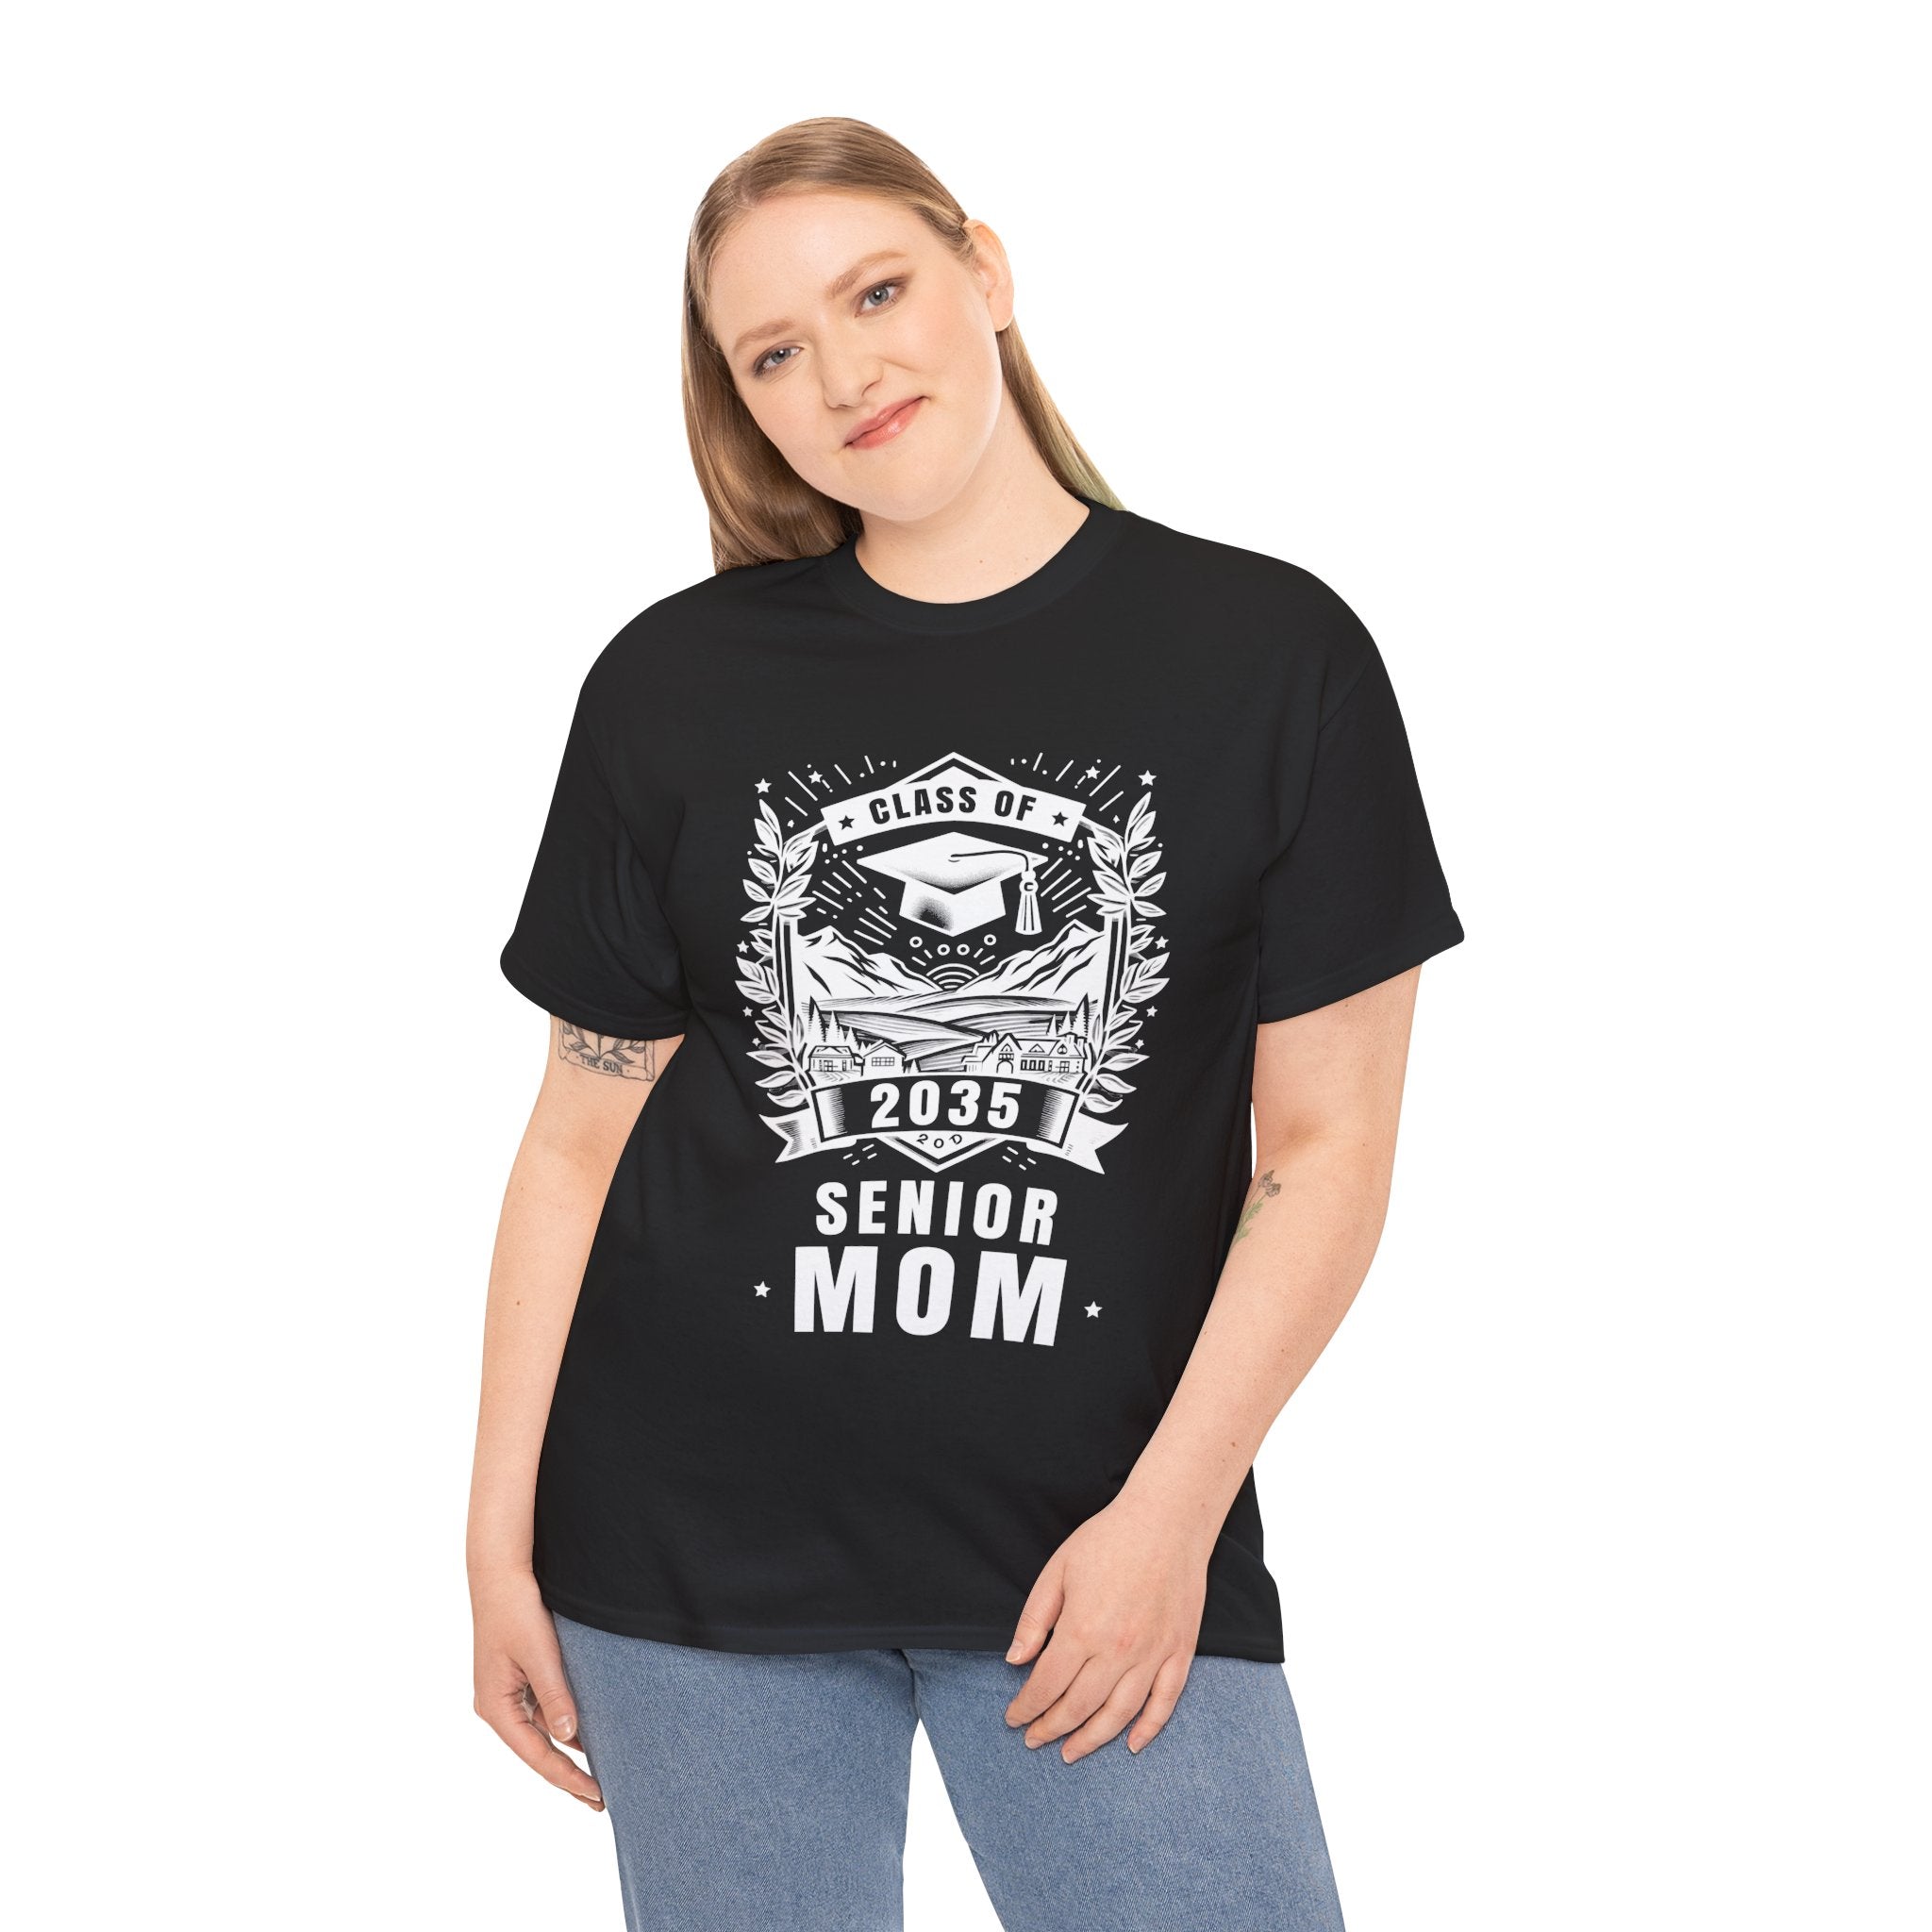 Senior Mom 35 Class of 2035 Back to School Graduation 2035 Plus Size Clothing for Women